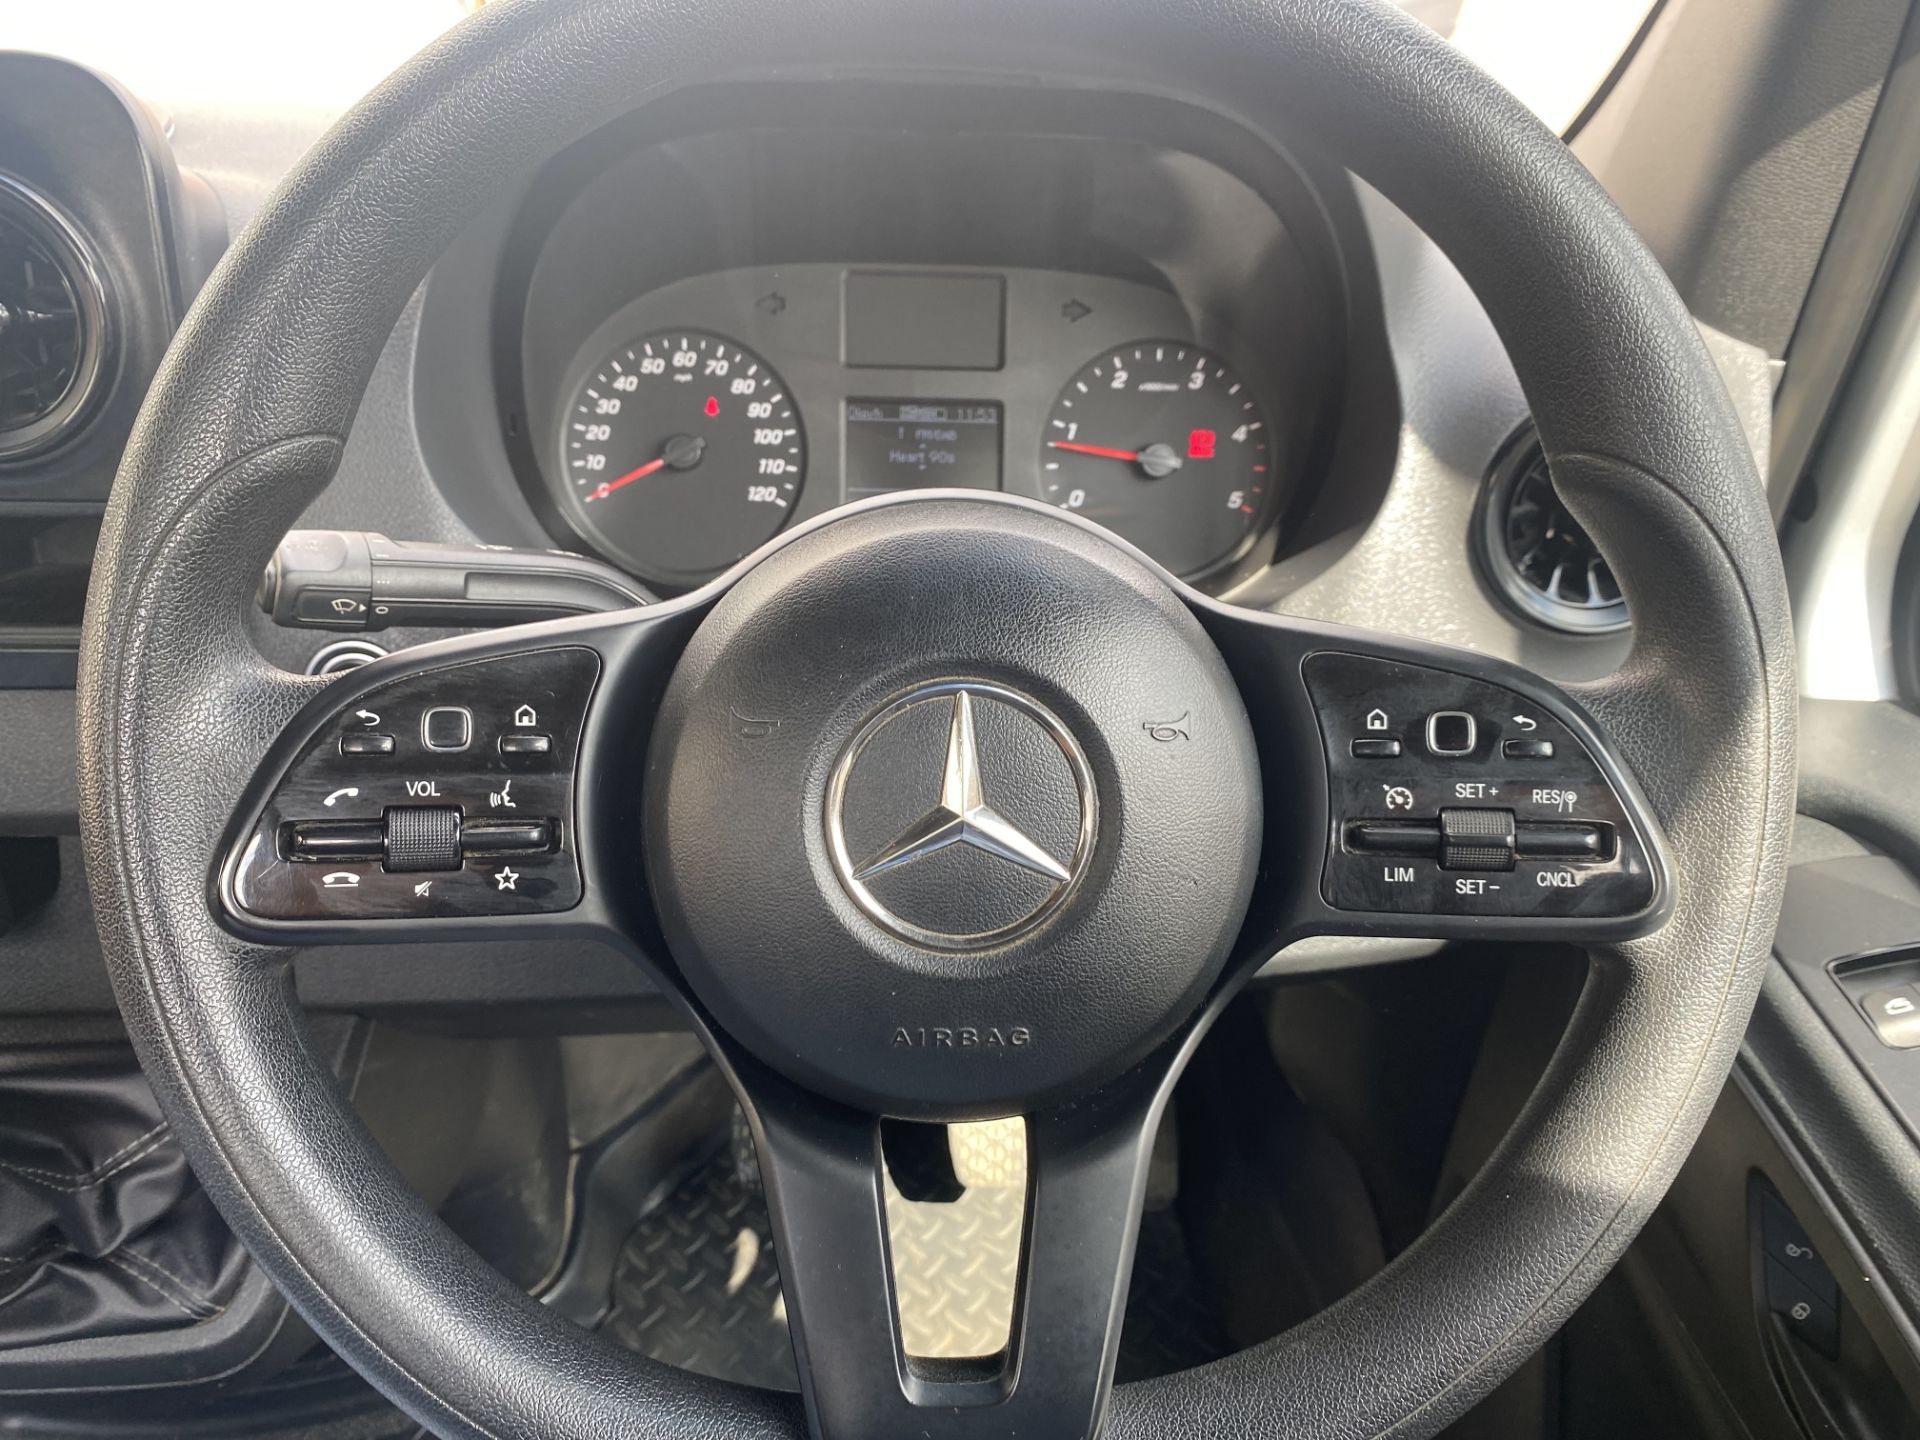 2018 MERCEDES BENZ SPRINTER 316 2.1 CDI L3 DIESEL RWD 3.5T CHASSIS CAB ALUMINIUM FLAT EXTRA LONG - Image 21 of 23